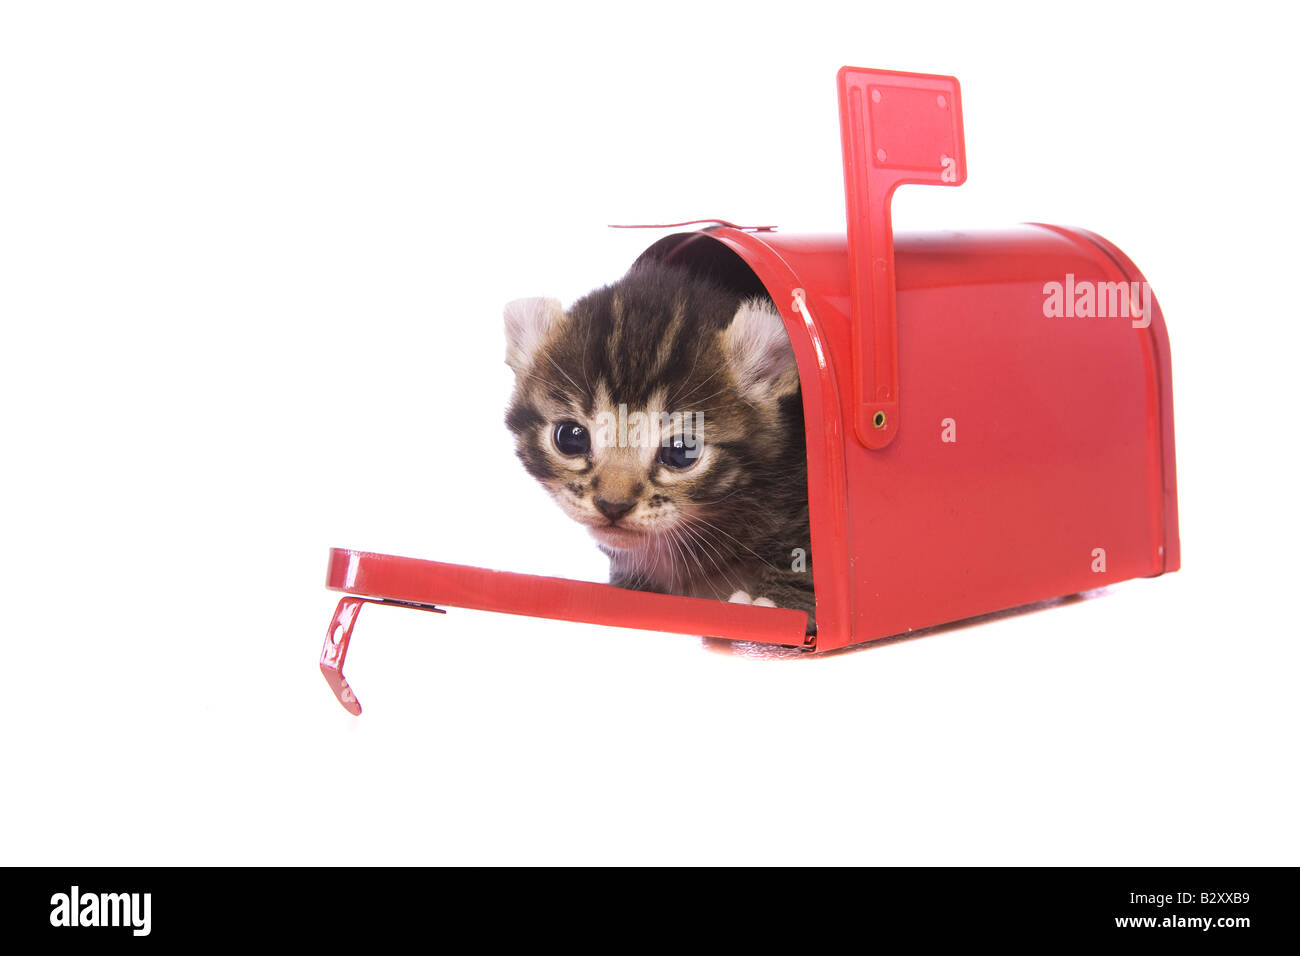 Mail Call for Monday, February 5th. Cute-brown-tabby-kitten-inside-of-small-red-mailbox-isolated-on-white-B2XXB9